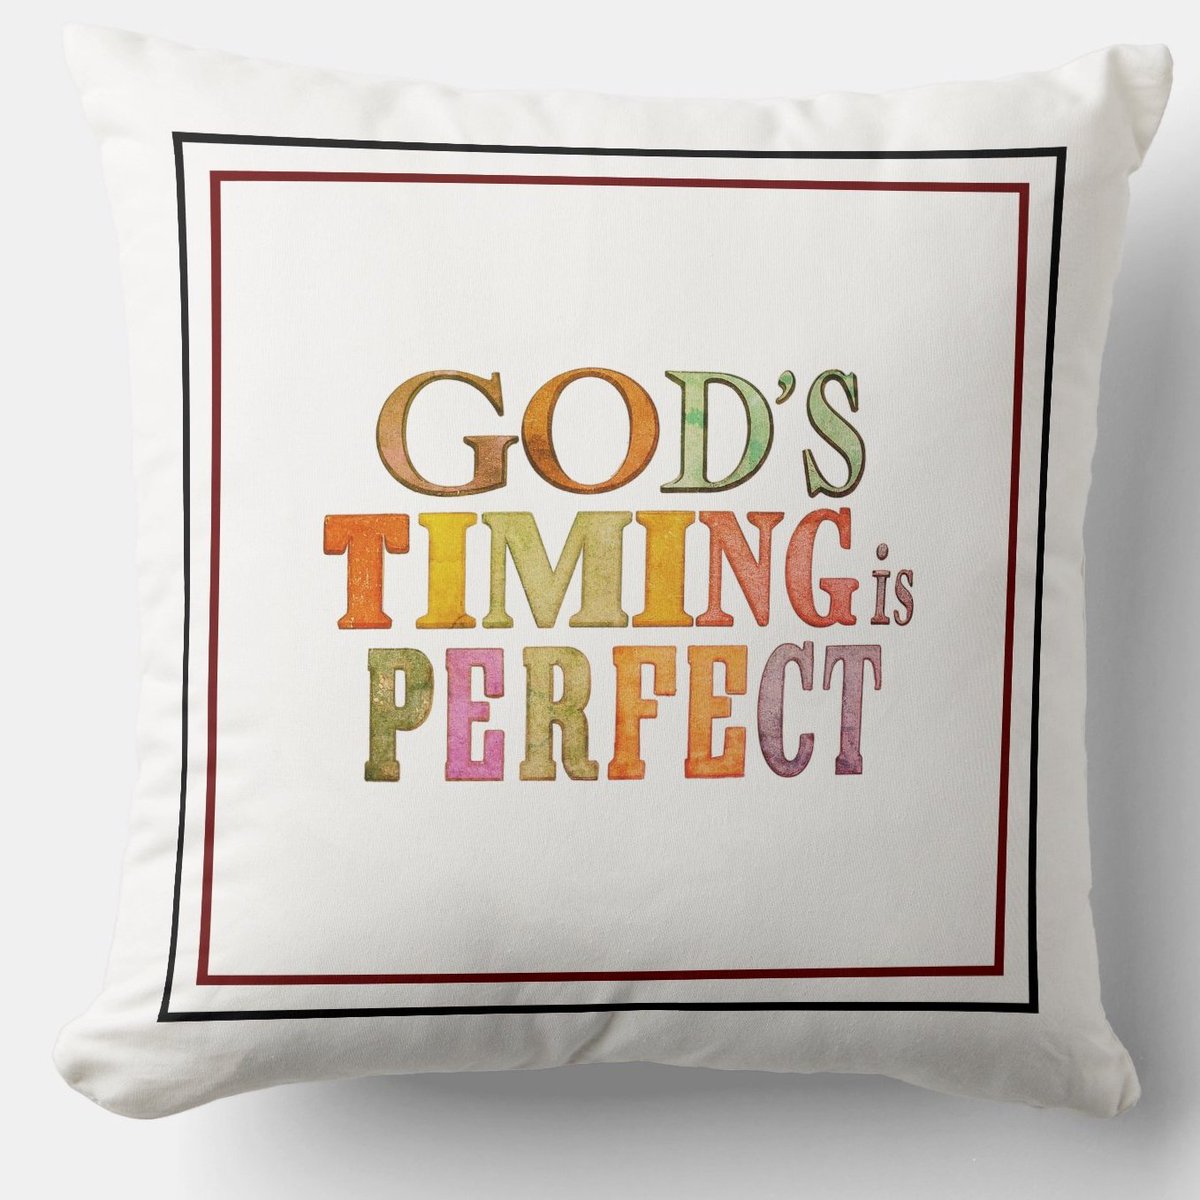 God's Timing Is Perfect #Cushion zazzle.com/gods_timing_is… Good God's Will #Pillow #Blessing #JesusChrist #JesusSaves #Jesus #christian #spiritual #Homedecoration #uniquegift #giftideas #MothersDayGifts #giftformom #giftidea #HolySpirit #pillows #giftshop #giftsforher #giftsformom